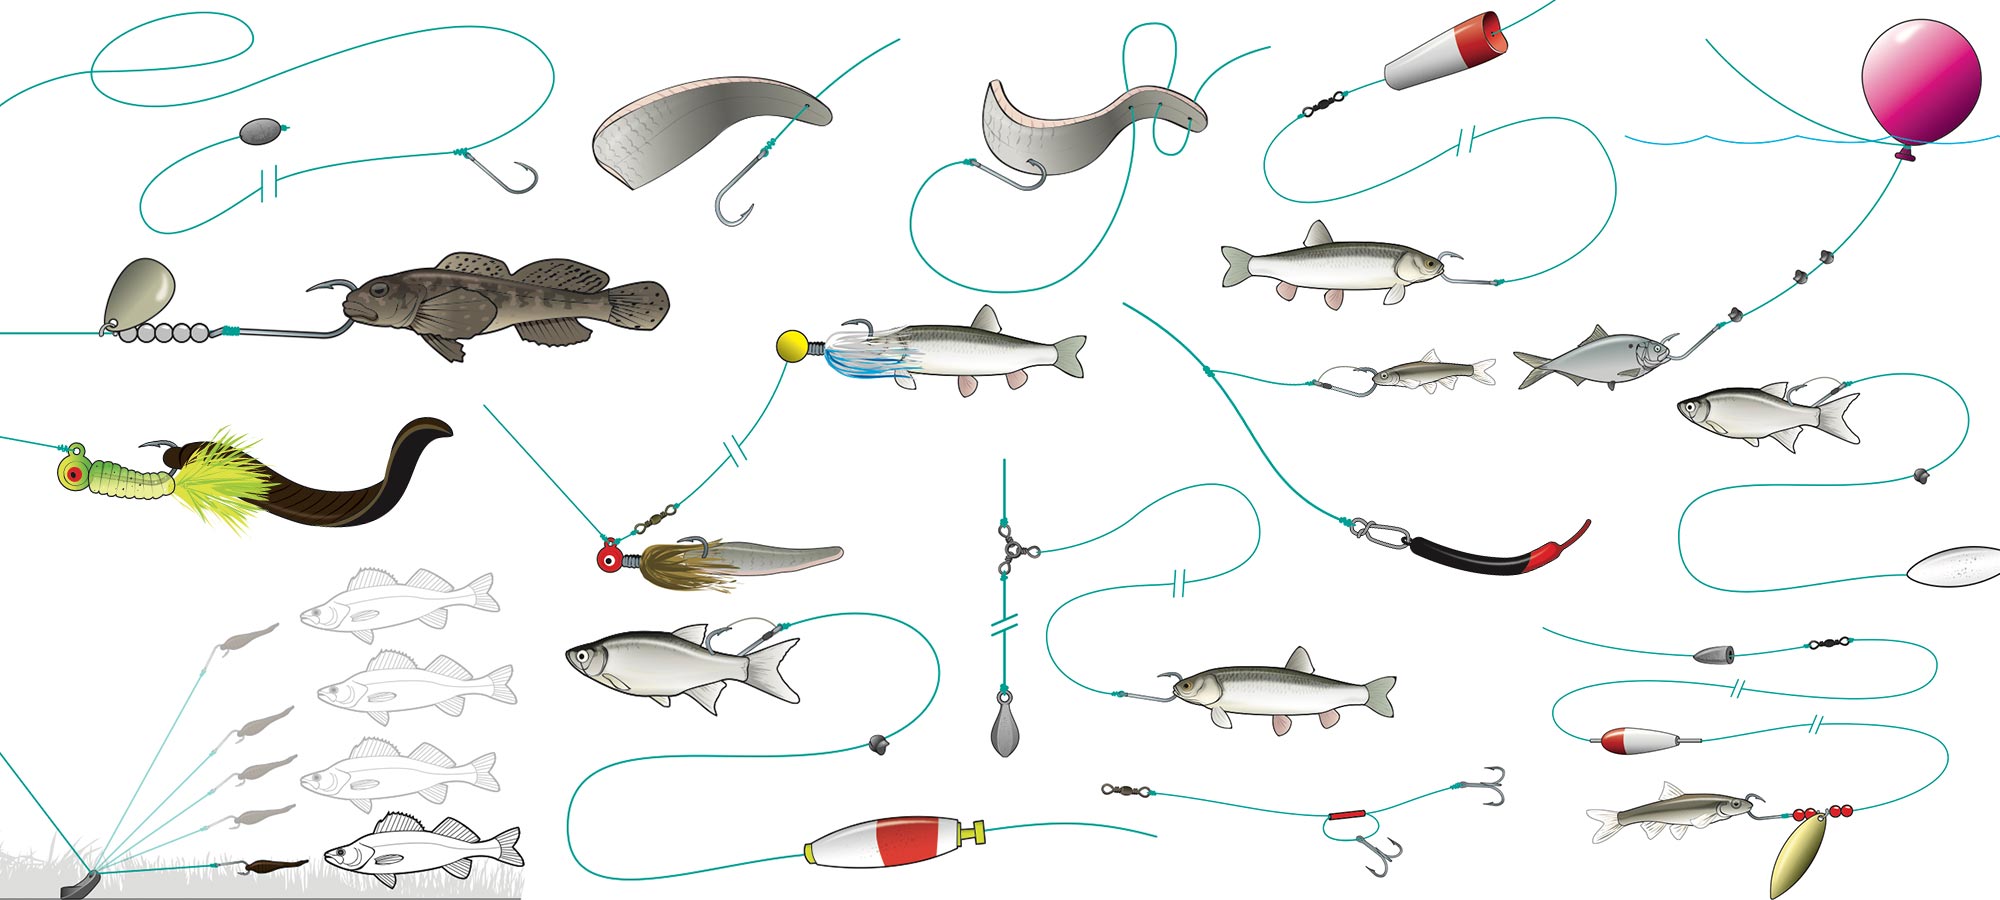 3 Simple Ways To Bridle Rig Your Live Bait To Catch More Fish.